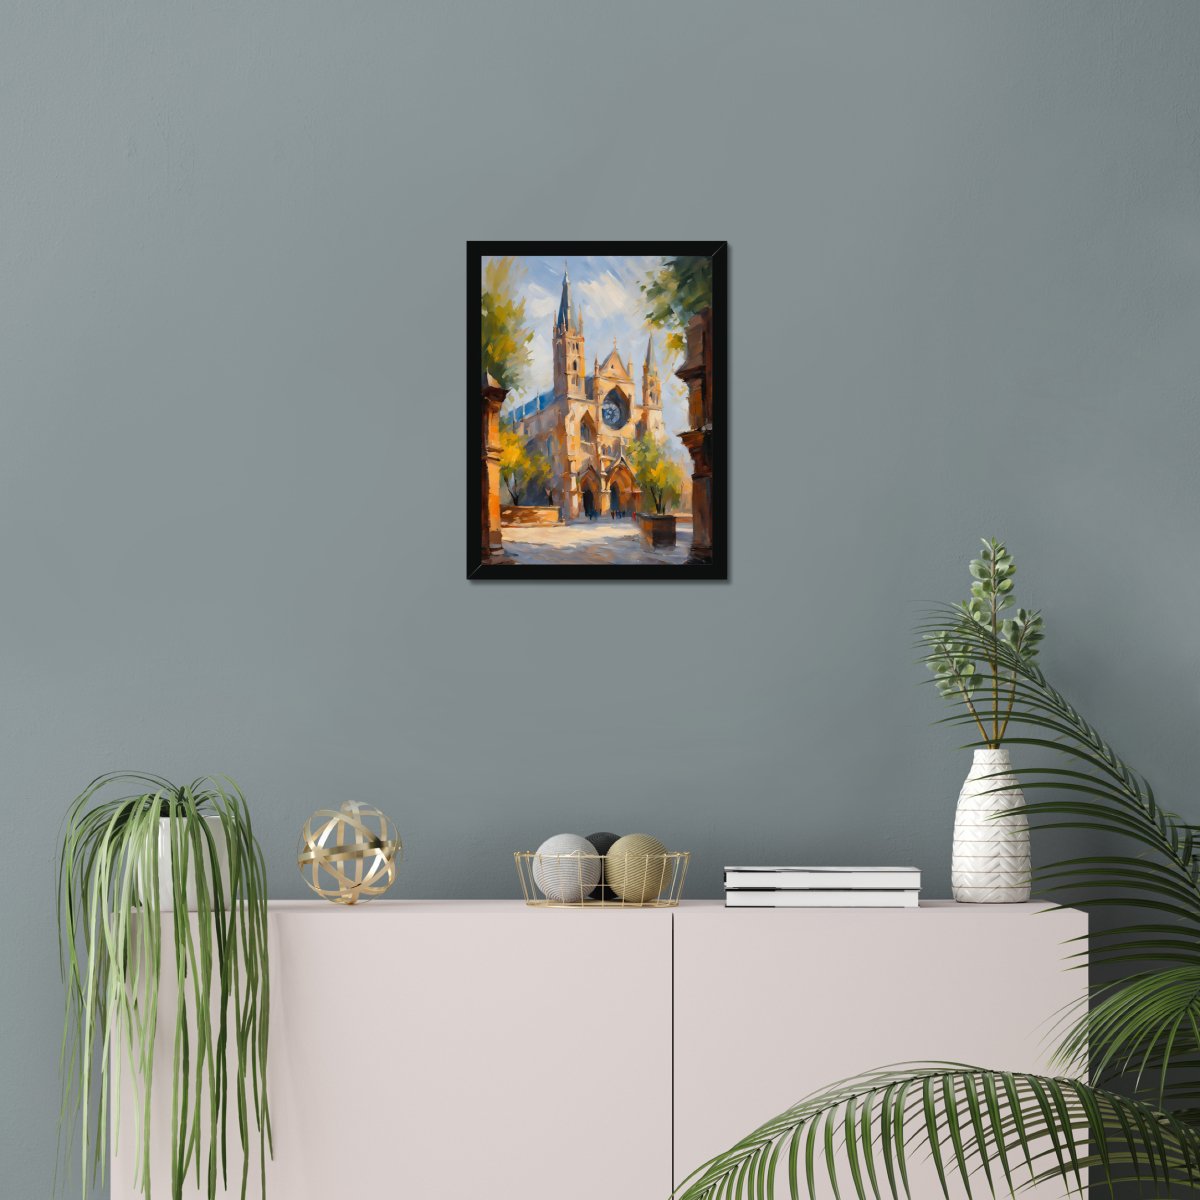 Western holy basilica - Art print - Poster - Ever colorful